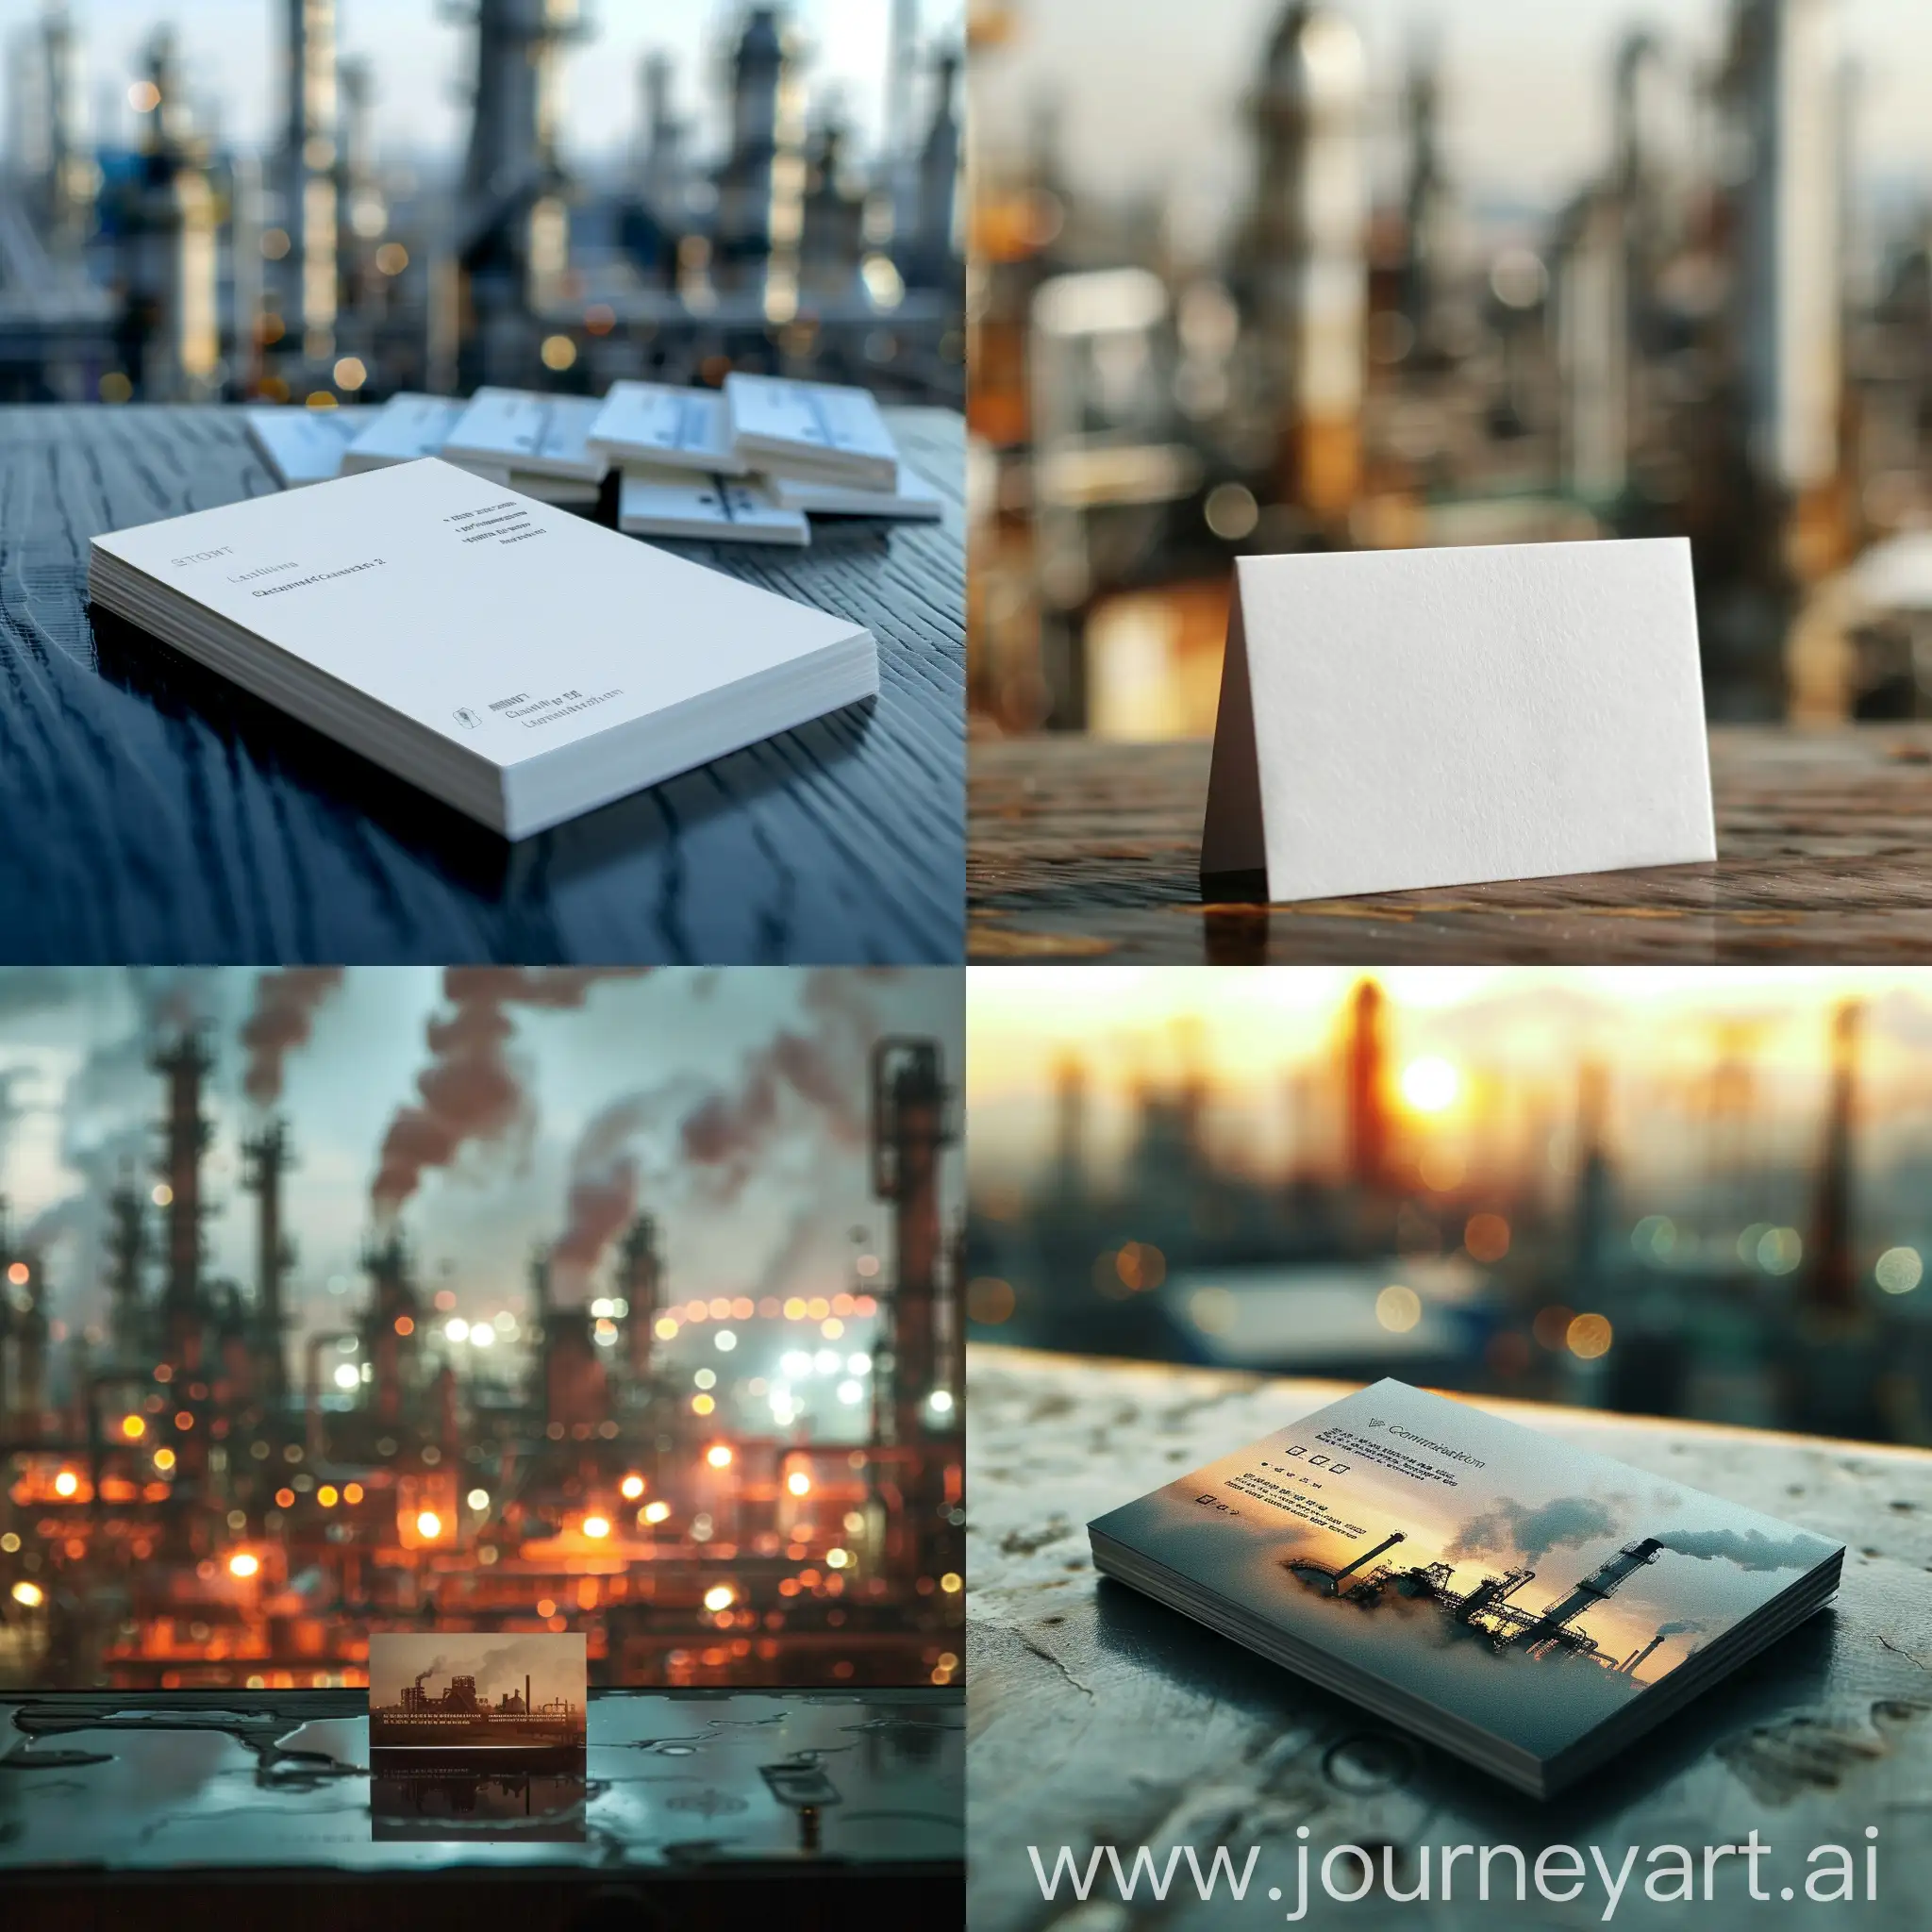 Gas-Refinery-Business-Card-Corporate-Identity-Amid-Industrial-Landscape